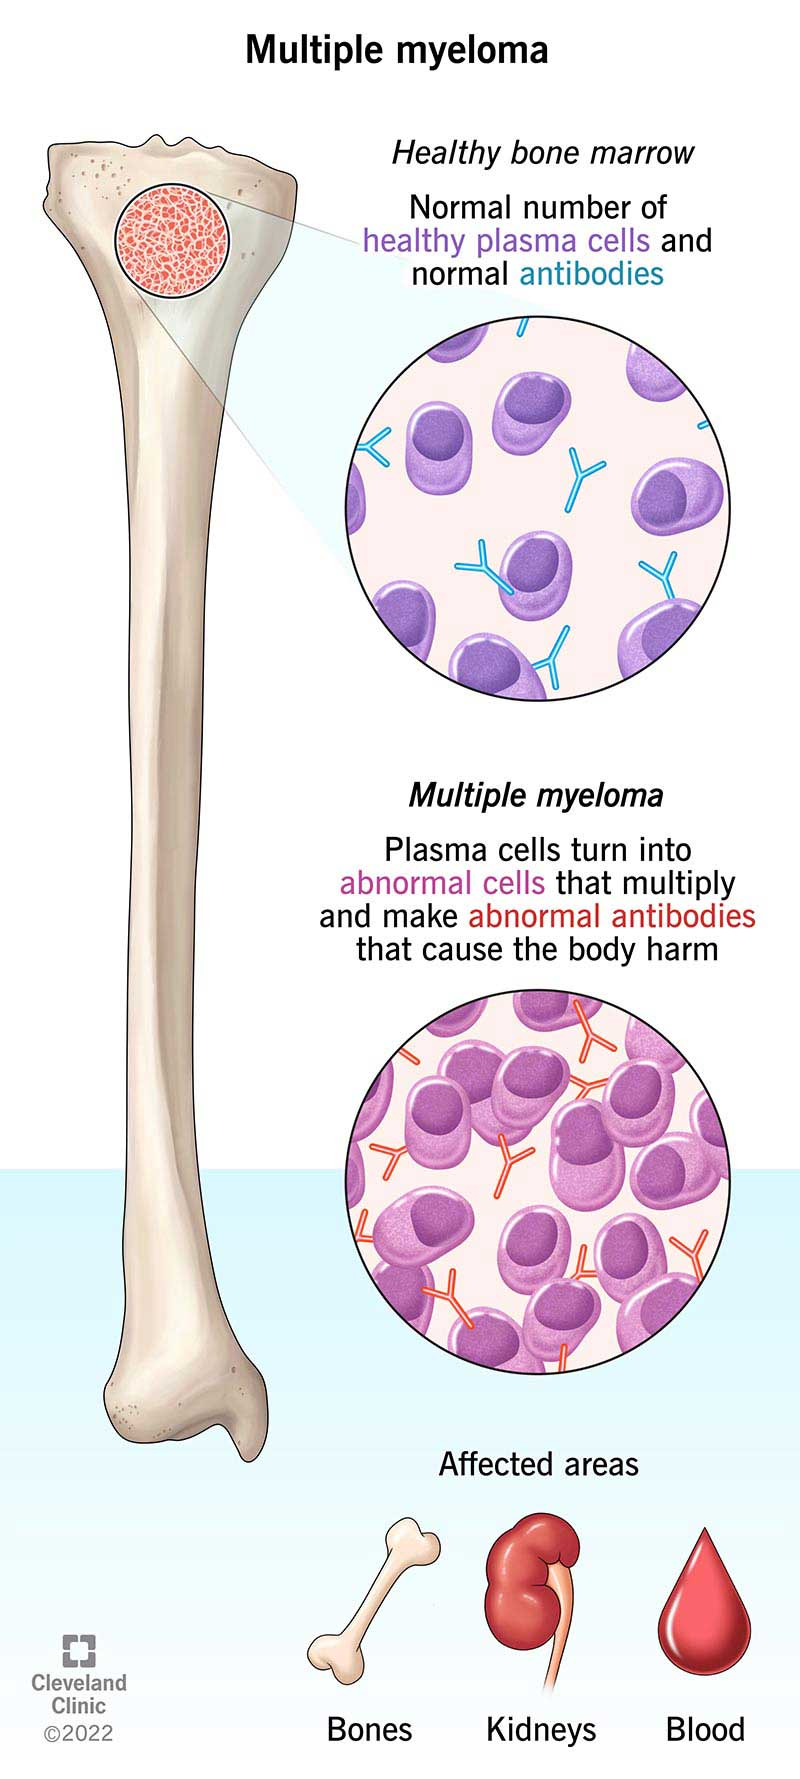 a bone with multiple myeloma cells